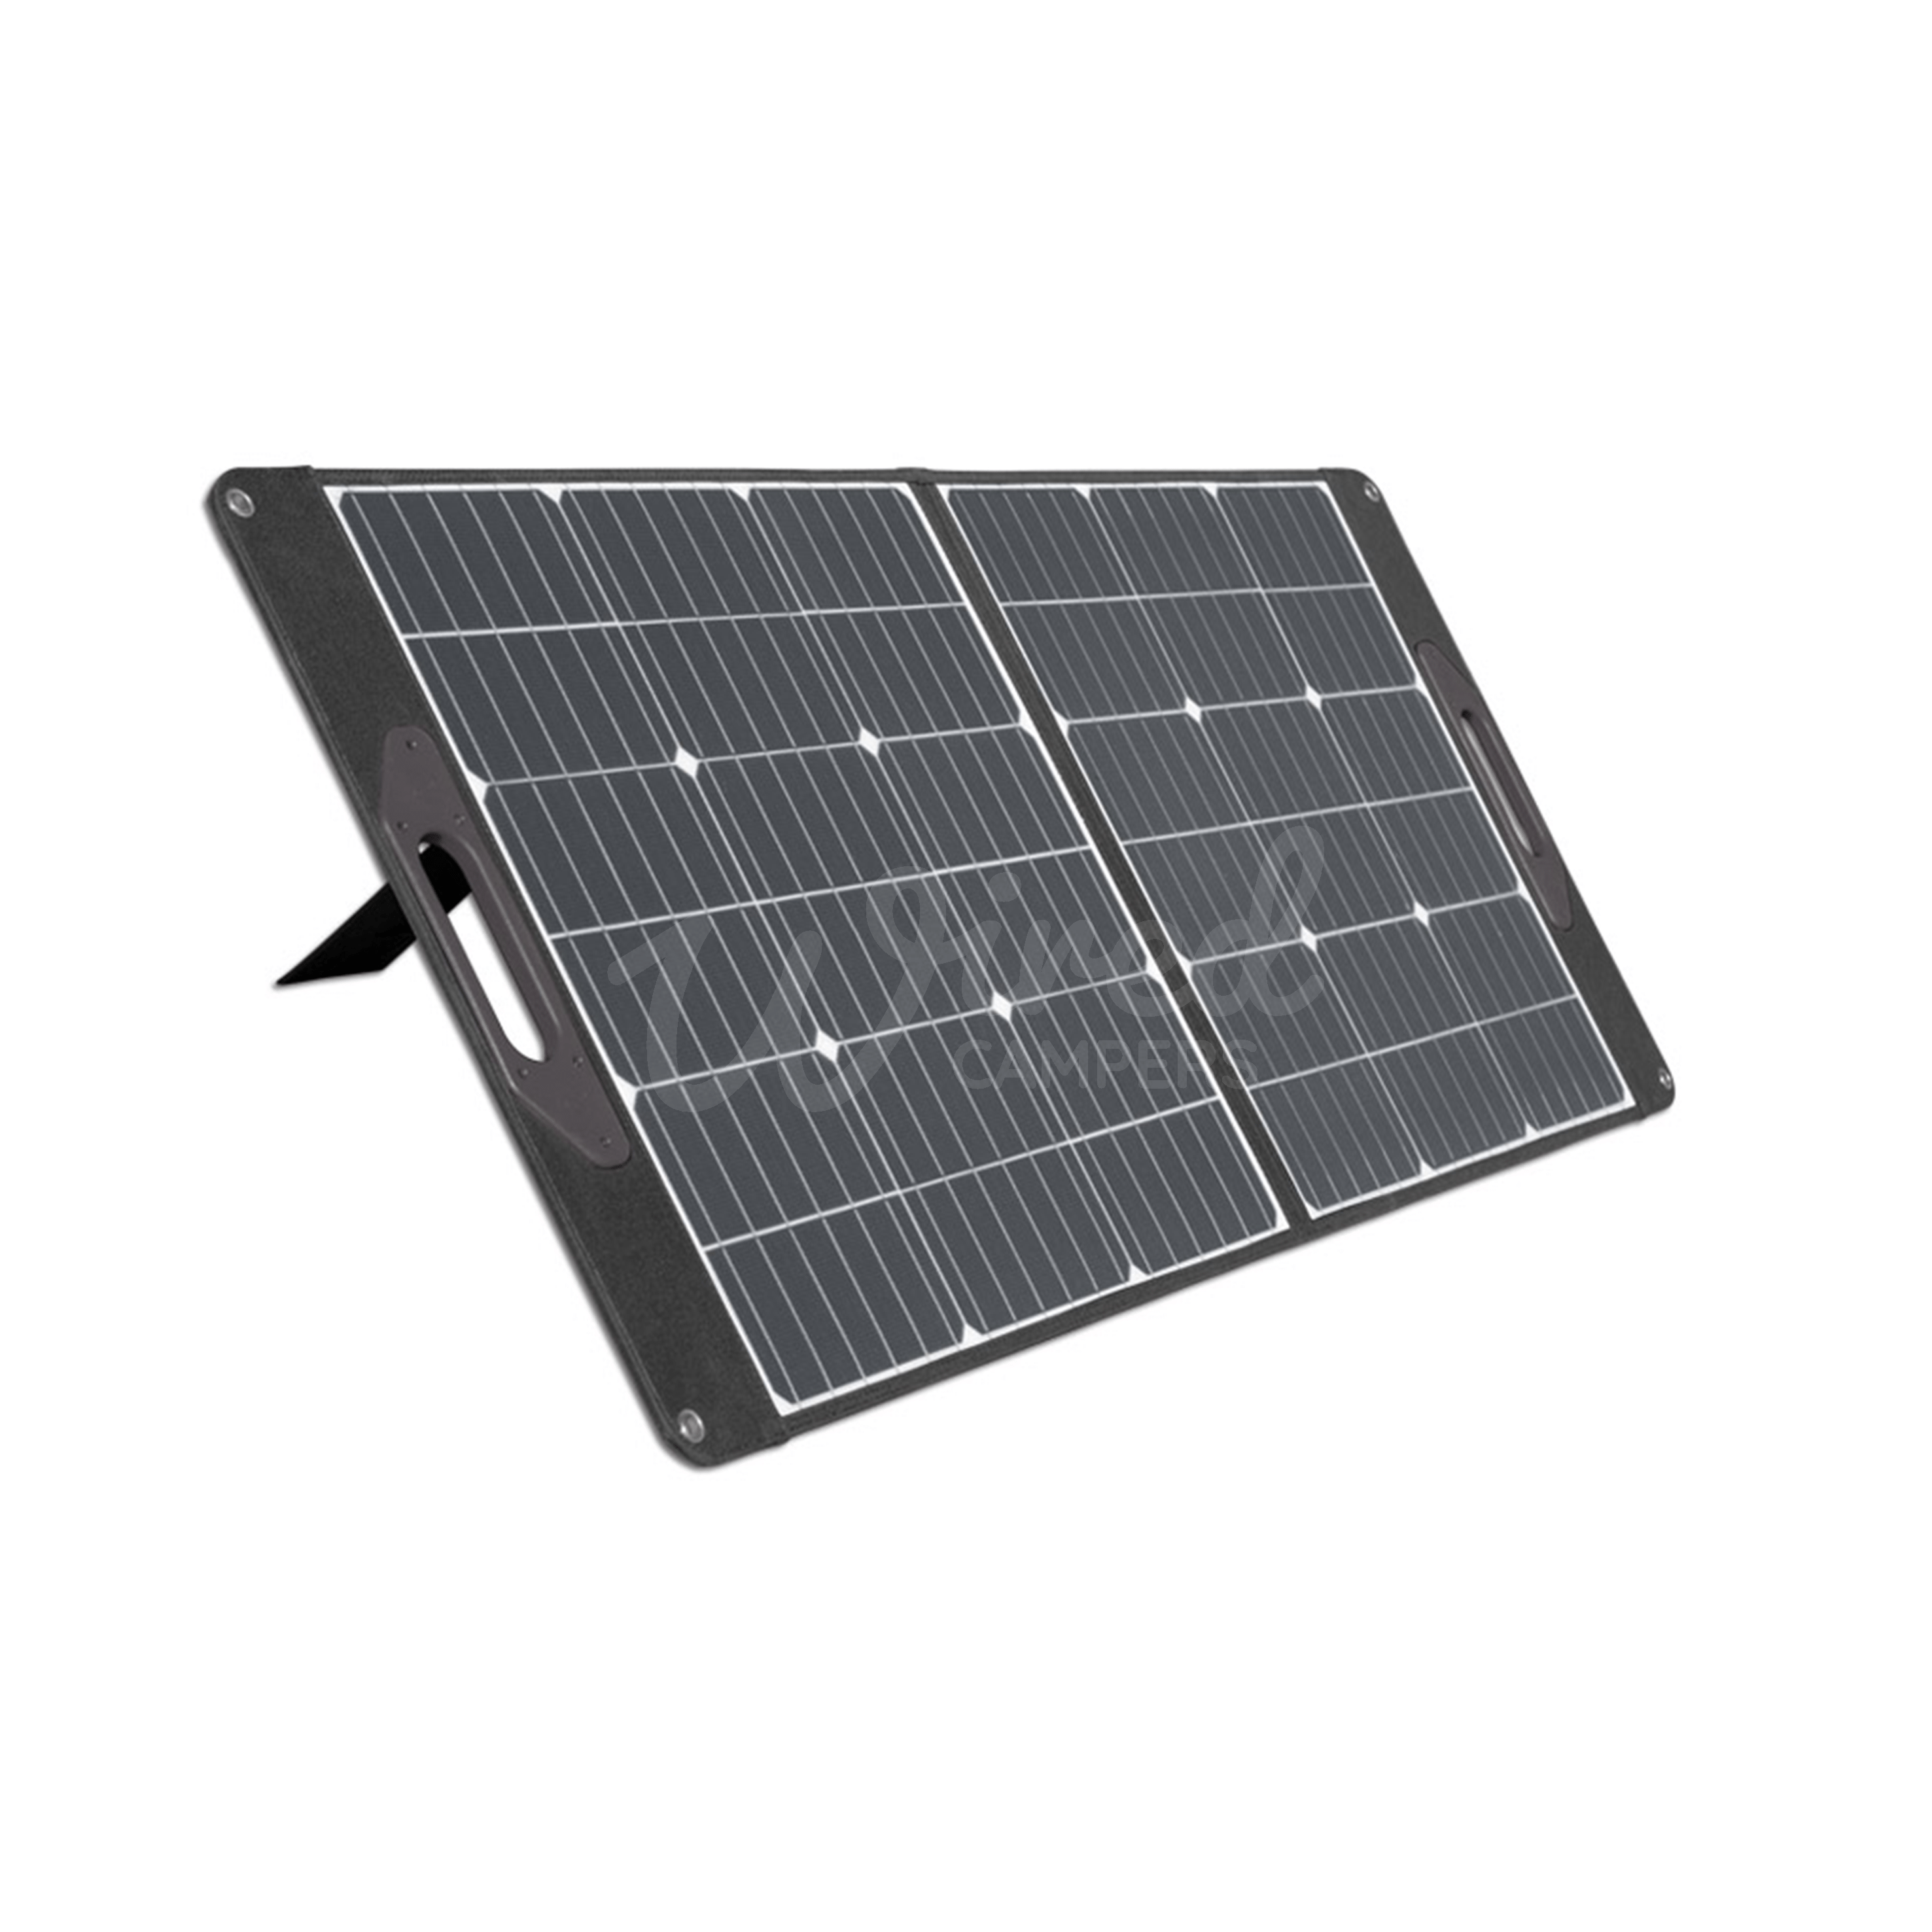 Wired Campers Limited 100W Portable Outdoor Foldable MONO Camping Solar PV Panel